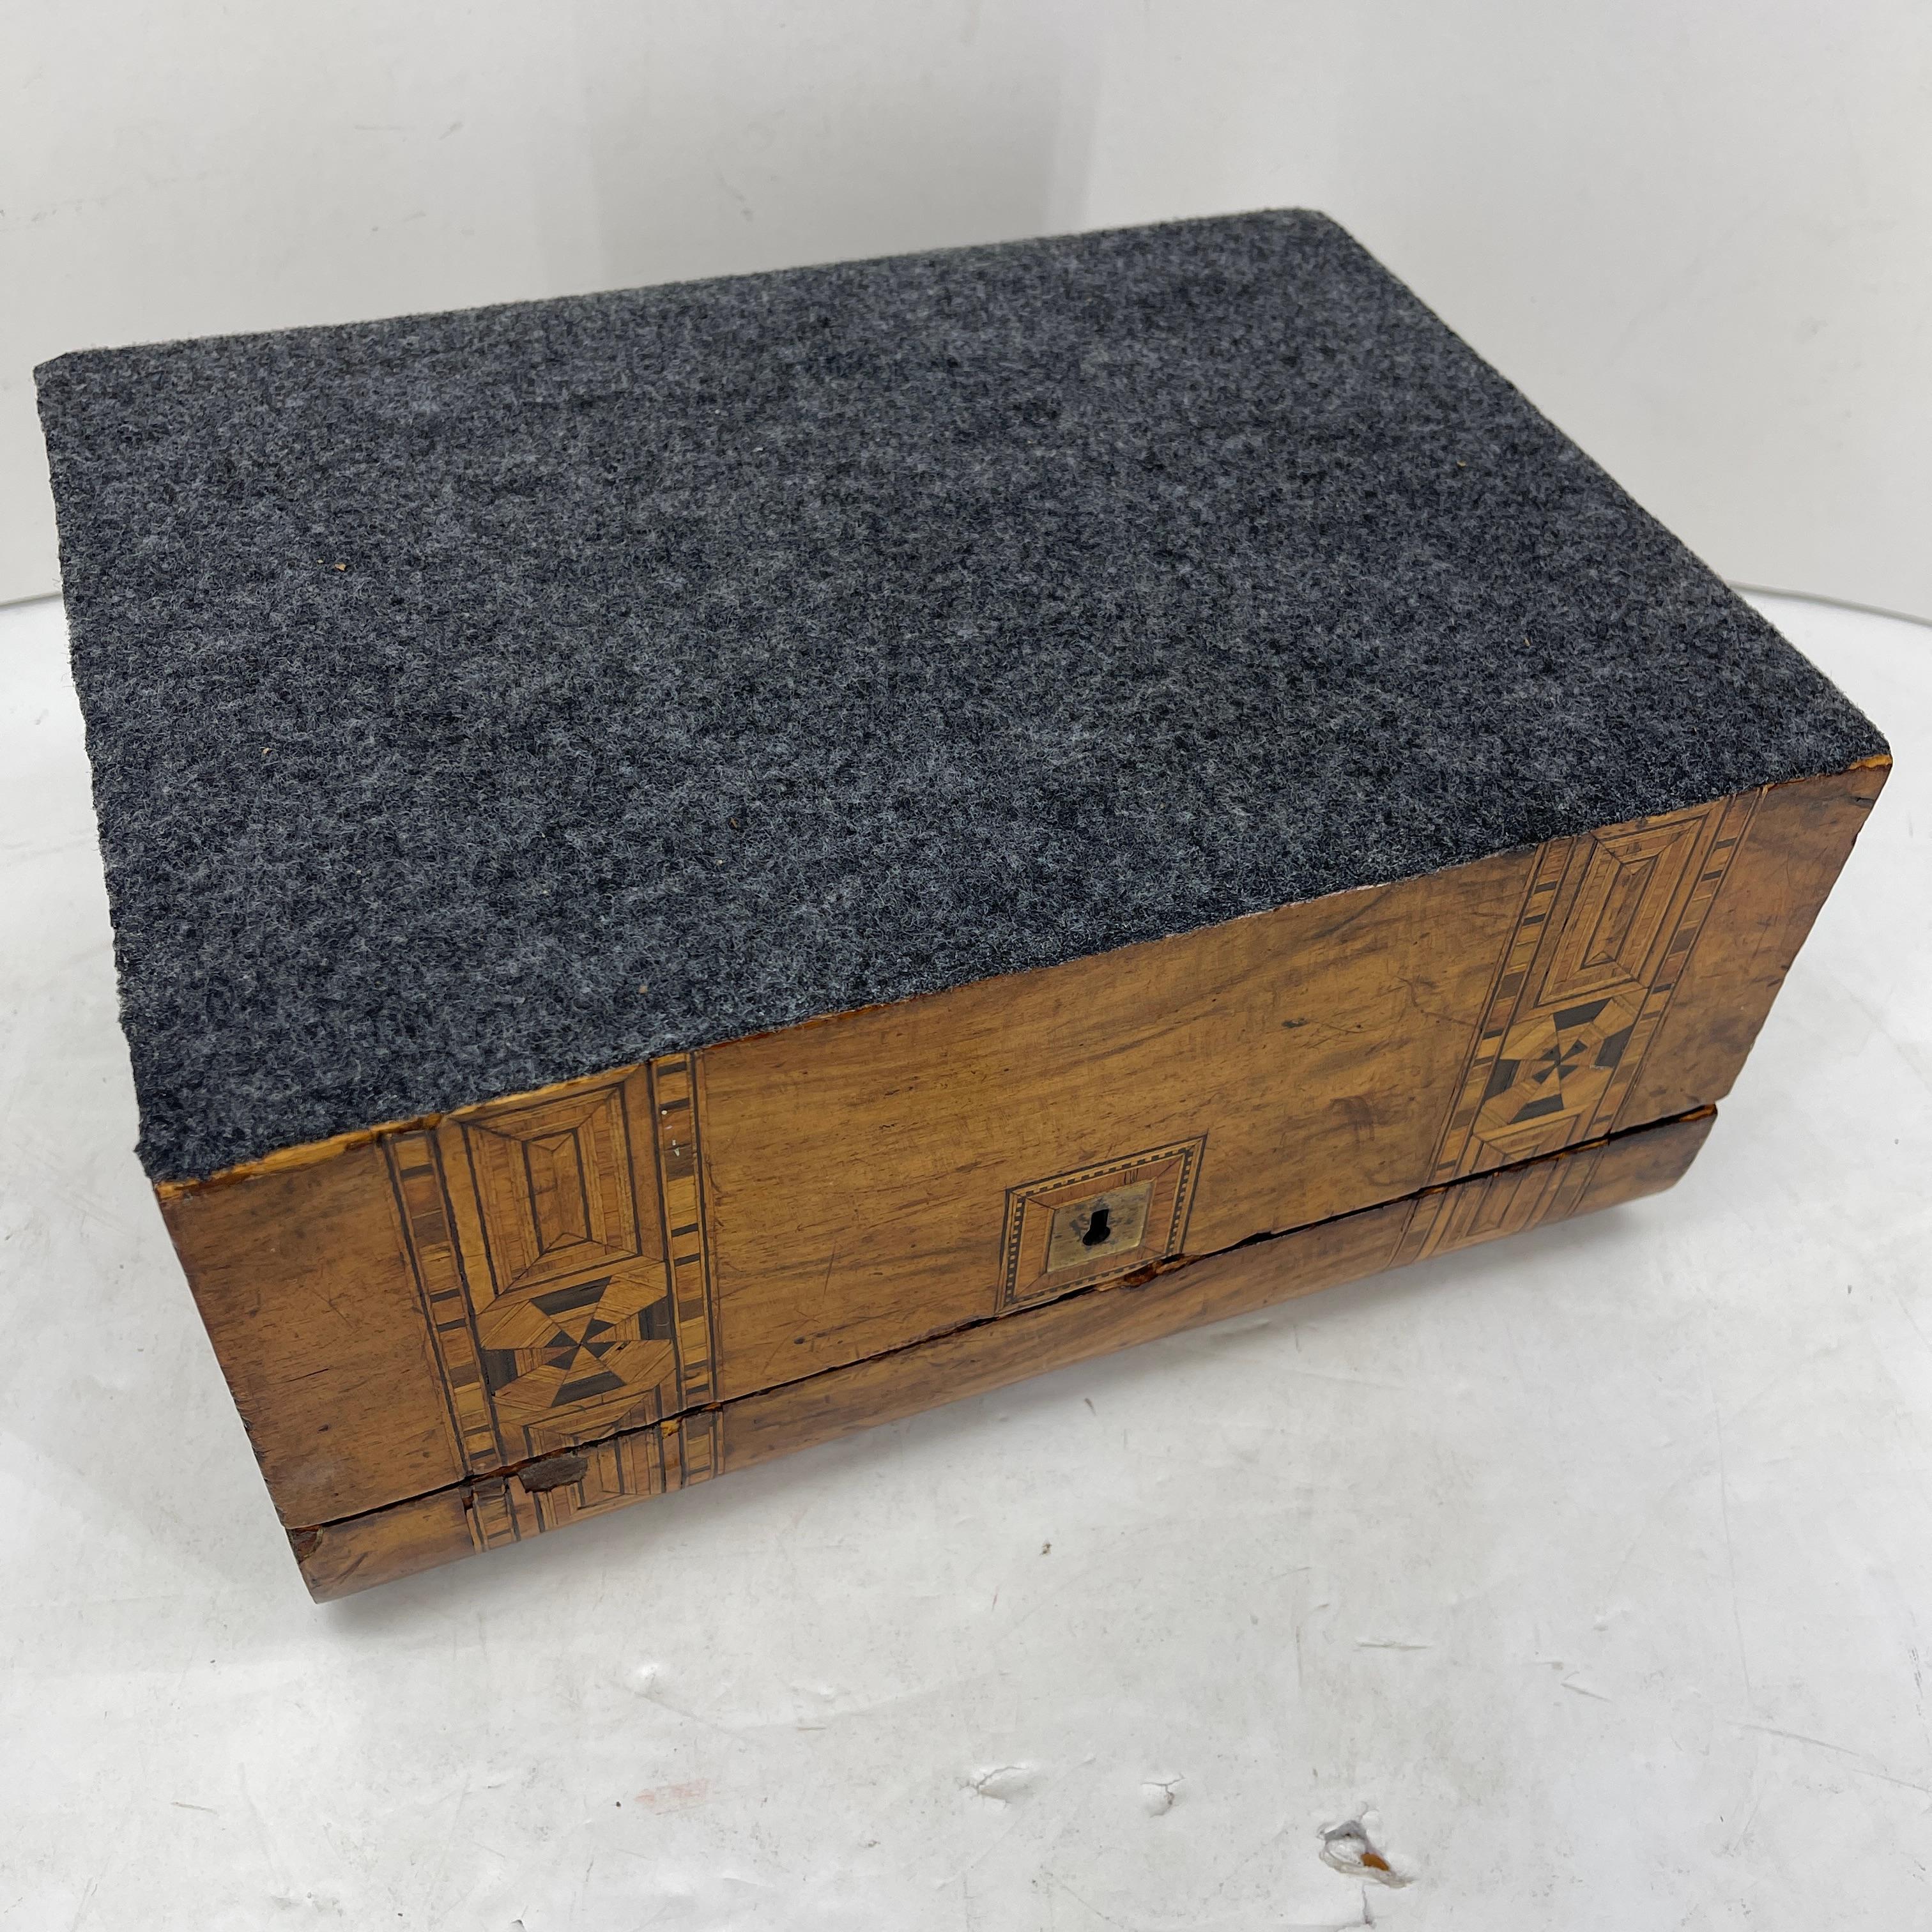 Swedish Inlaid Fruitwood and Veneered Box with Curved Top Early 19th Century For Sale 11